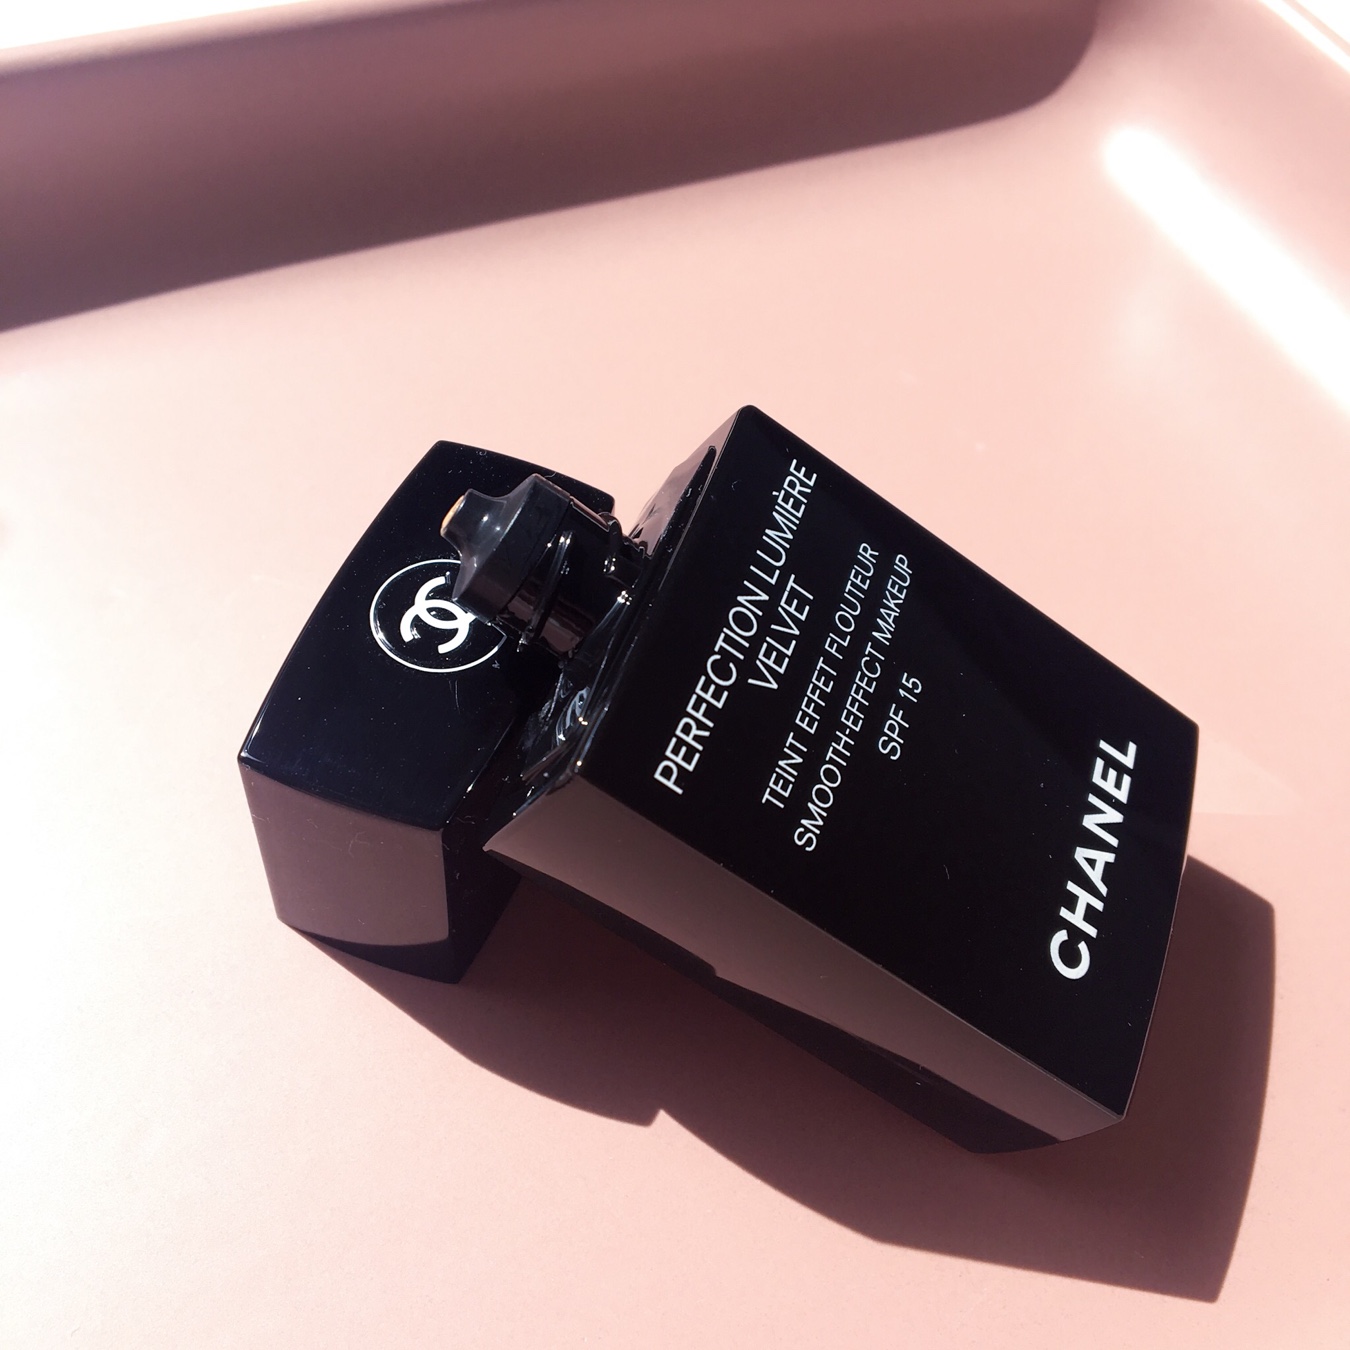 Chanel Perfection Lumiere Velvet Smooth-Effect Makeup: Okay, I Get The Hype  - Beautyholics Anonymous